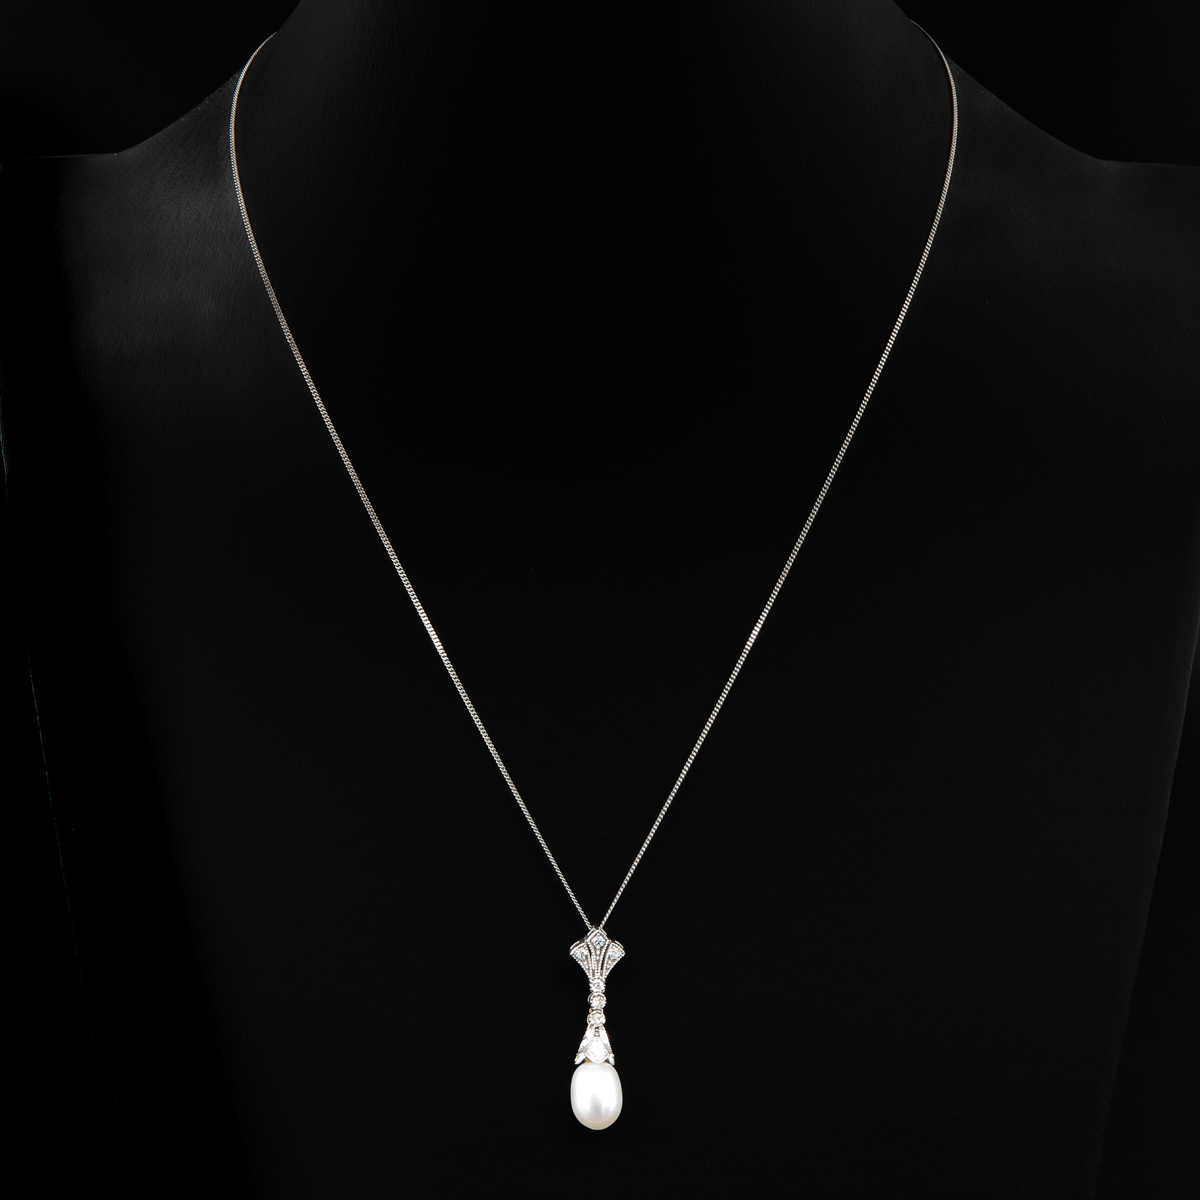 A Necklace with Pearl and Diamond Pendant - Image 3 of 6